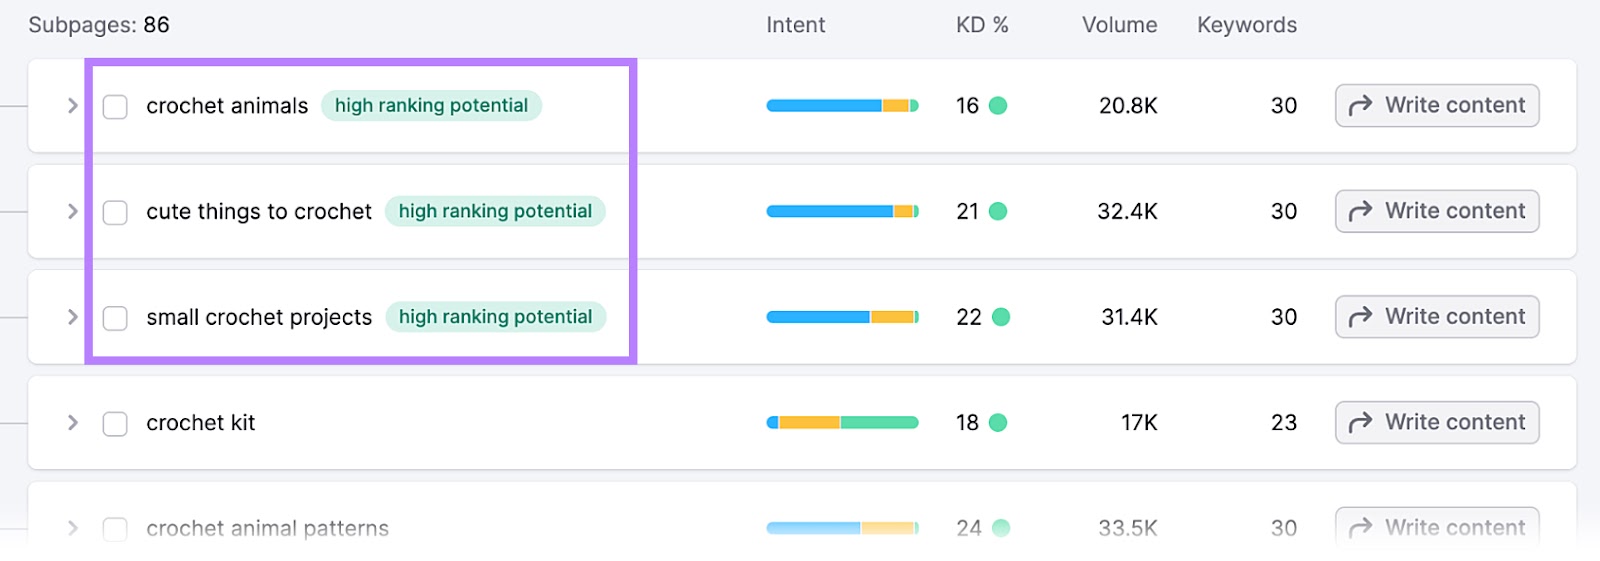 Keyword Strategy Builder tool showing 3 subpages with the "high ranking potential" tag next to them.